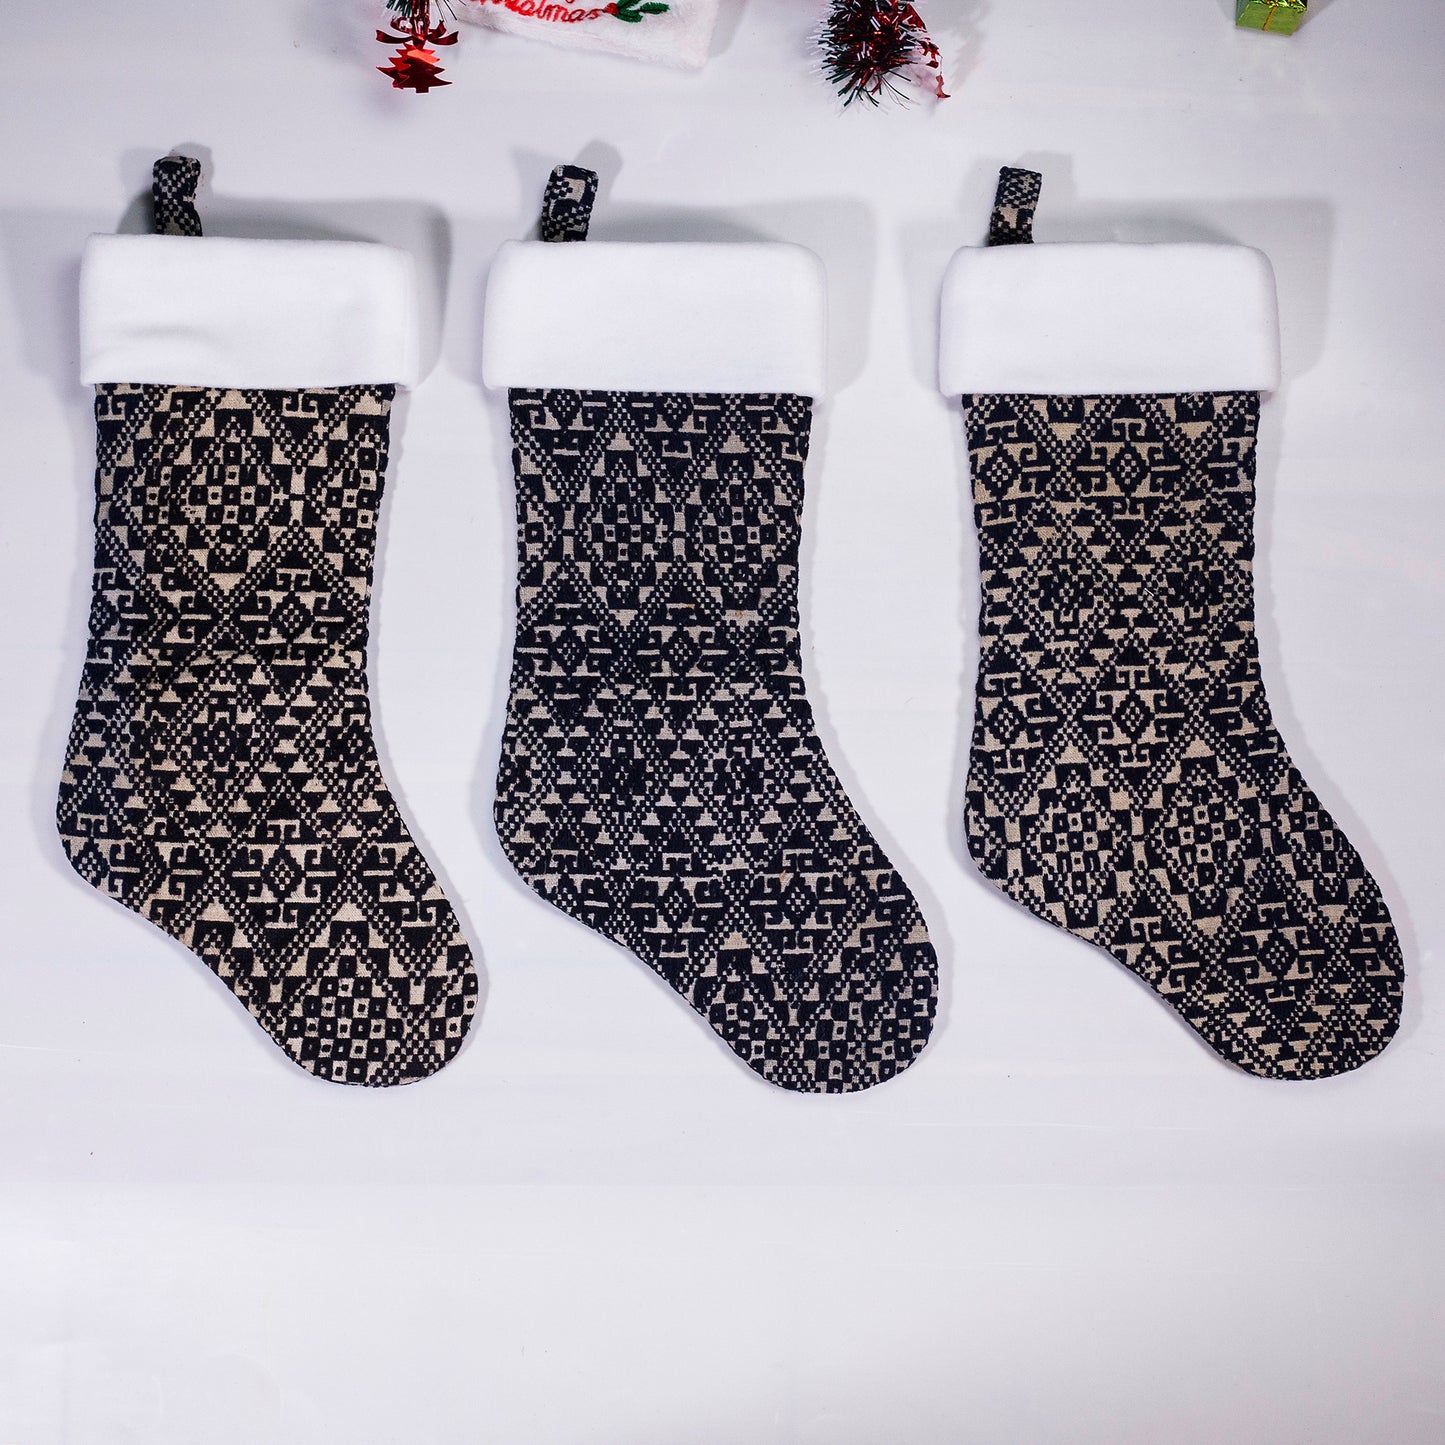 Christmas Stockings - Black and Blue embroidery